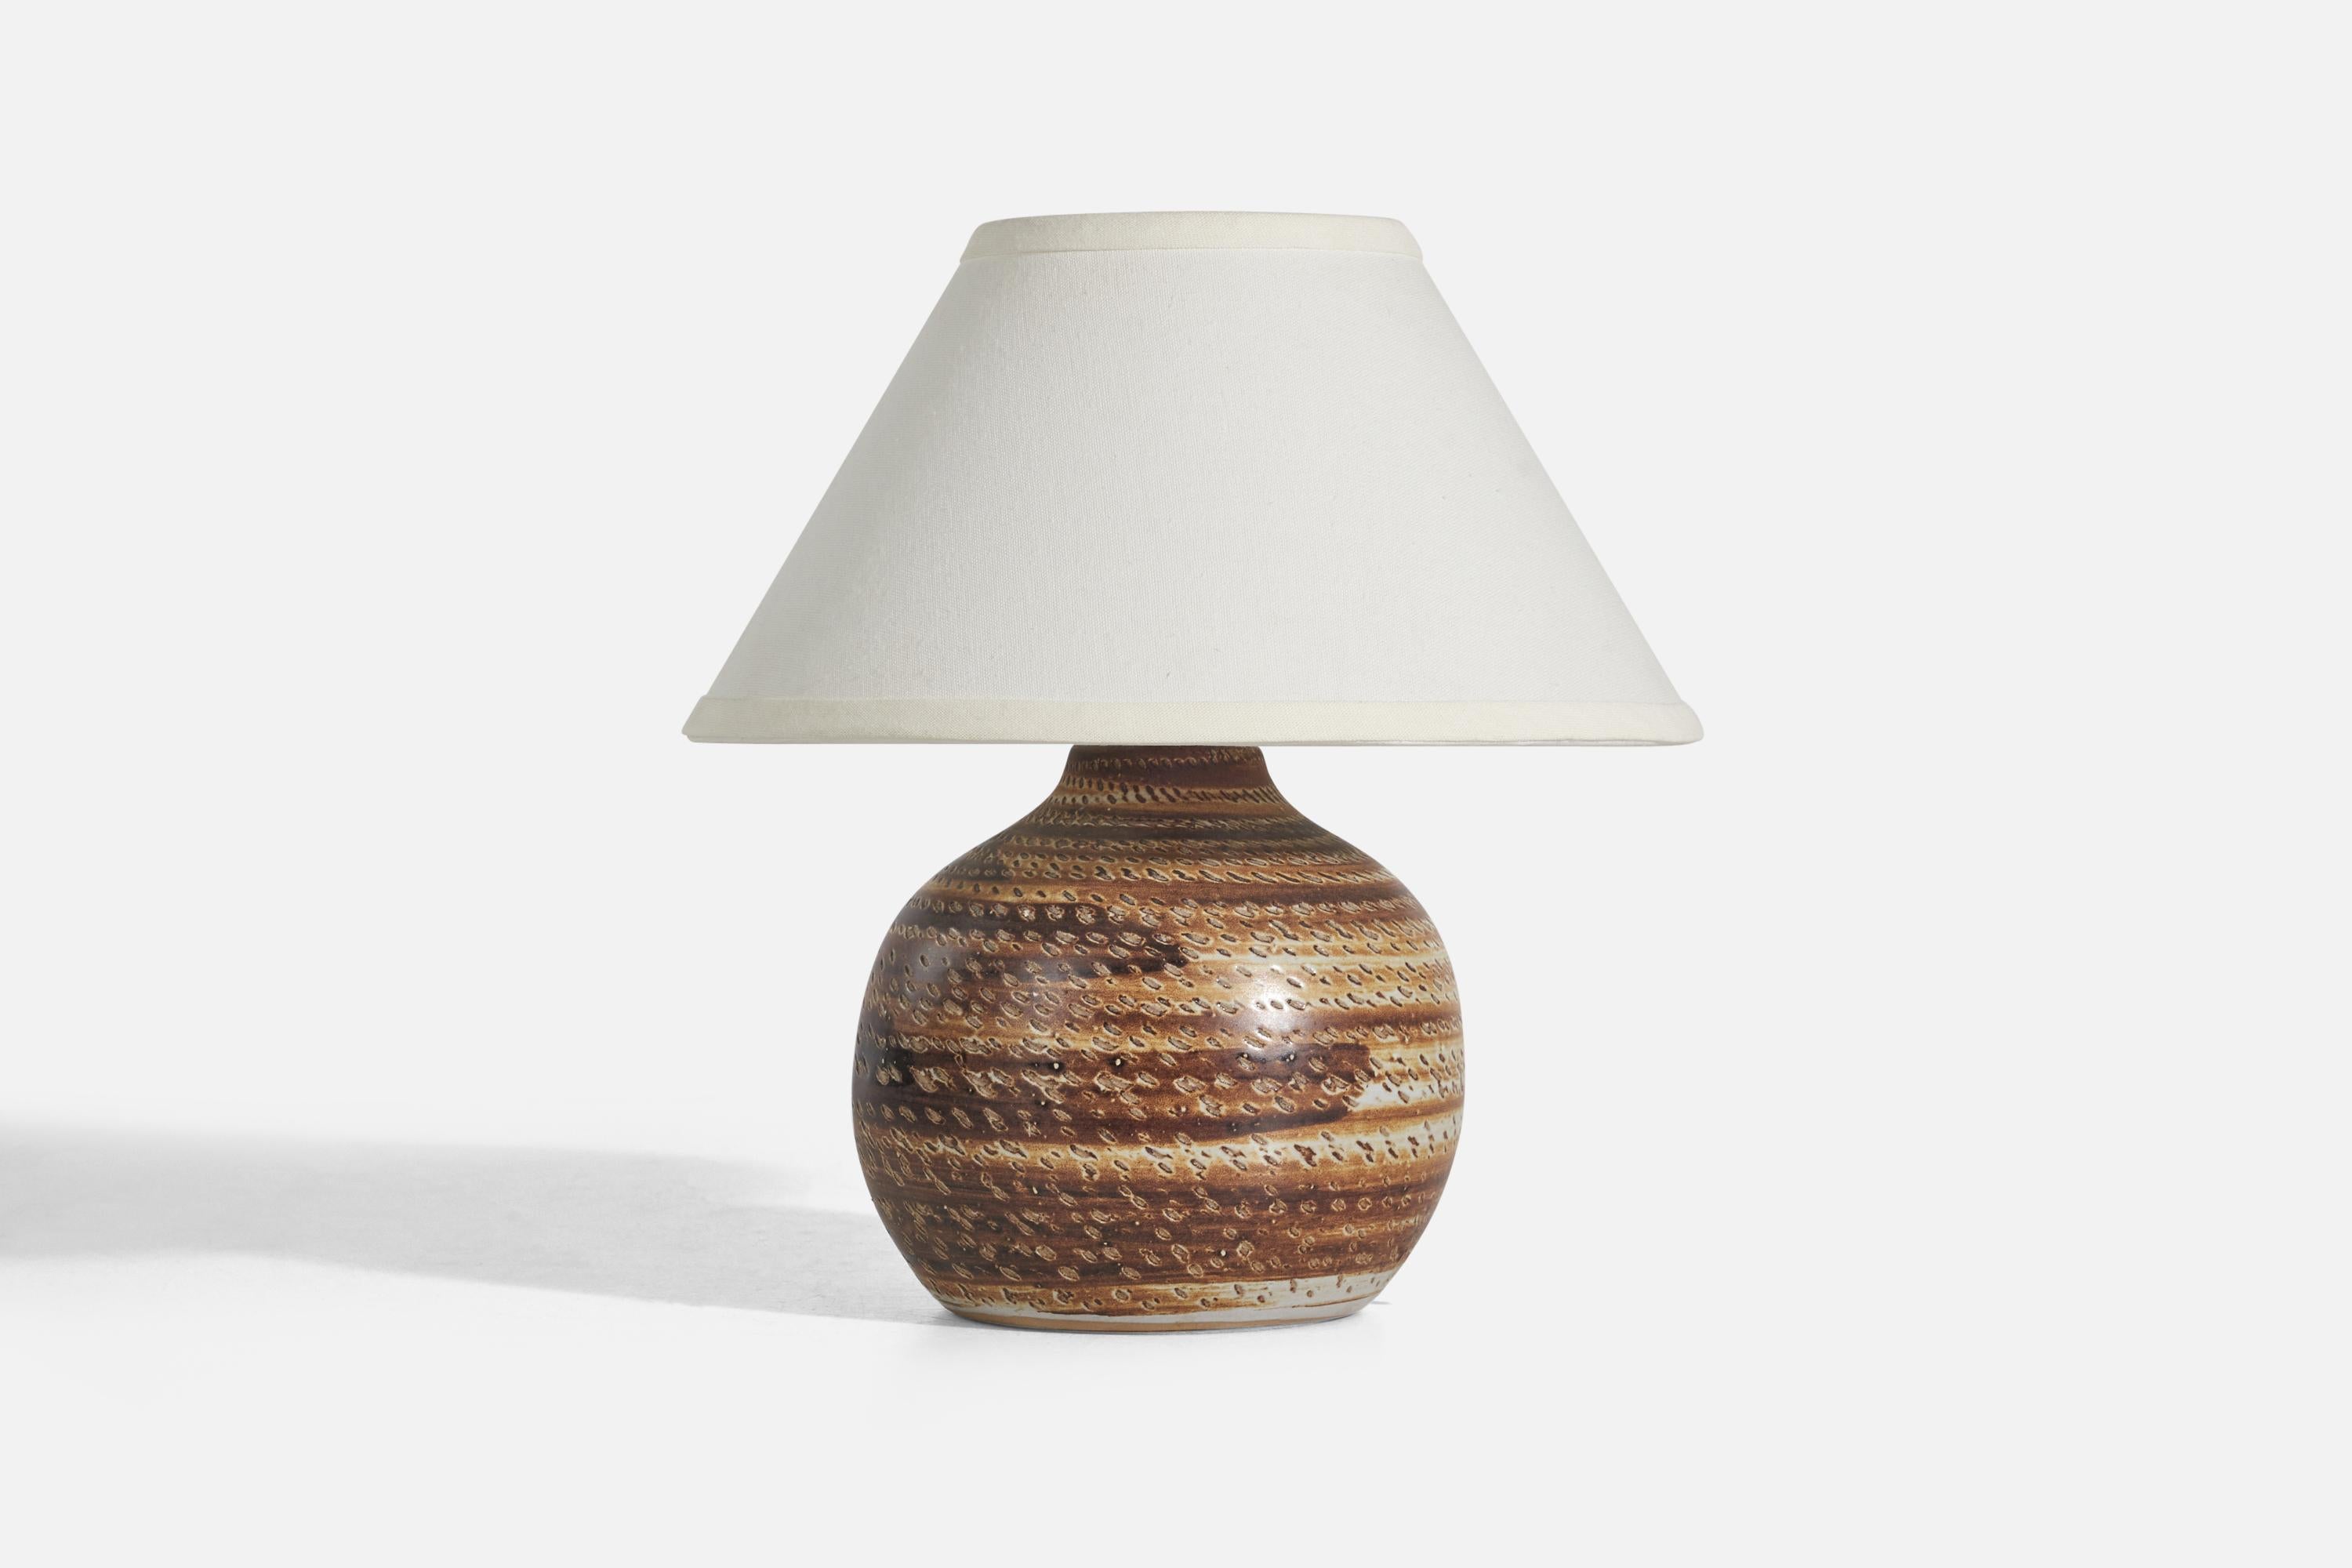 A brown table lamp designed by Jane & Gordon Martz and produced by Marshall Studios, Indianapolis, 1950s.

Sold without Lampshade
Dimensions of Lamp (inches) : 9.68 x 7.18 x 7.18 (Height x Width x Depth)
Dimensions of Lampshade (inches) : 5 x 12 x 7